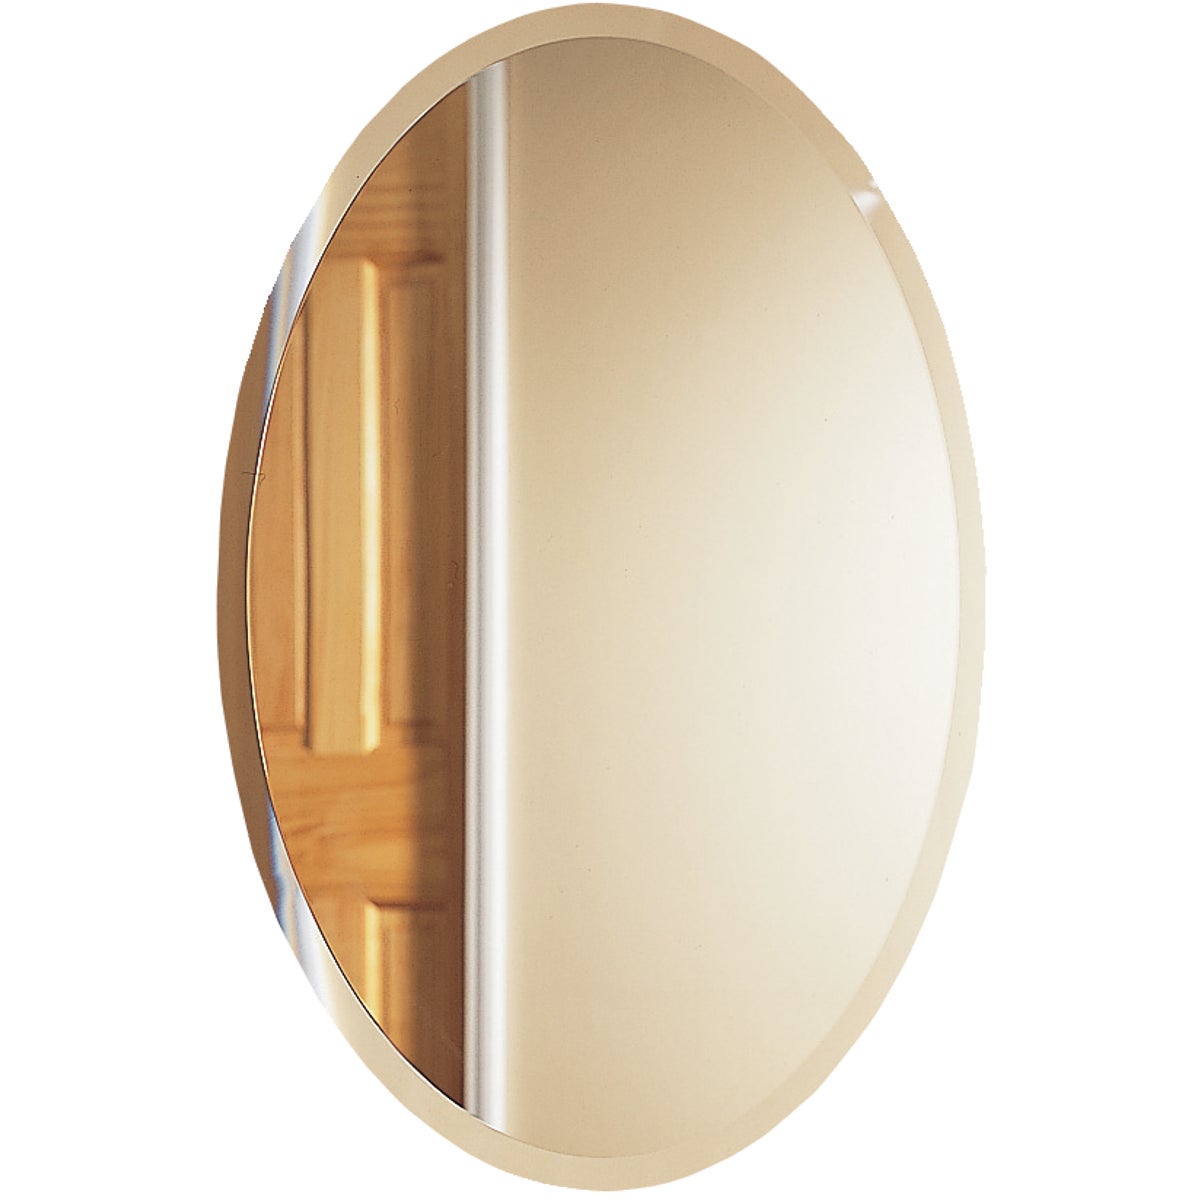 Zenith Frameless Beveled 21 In. W x 31 In. H x 4 In. D Single Mirror Surface Mount Oval Medicine Cabinet